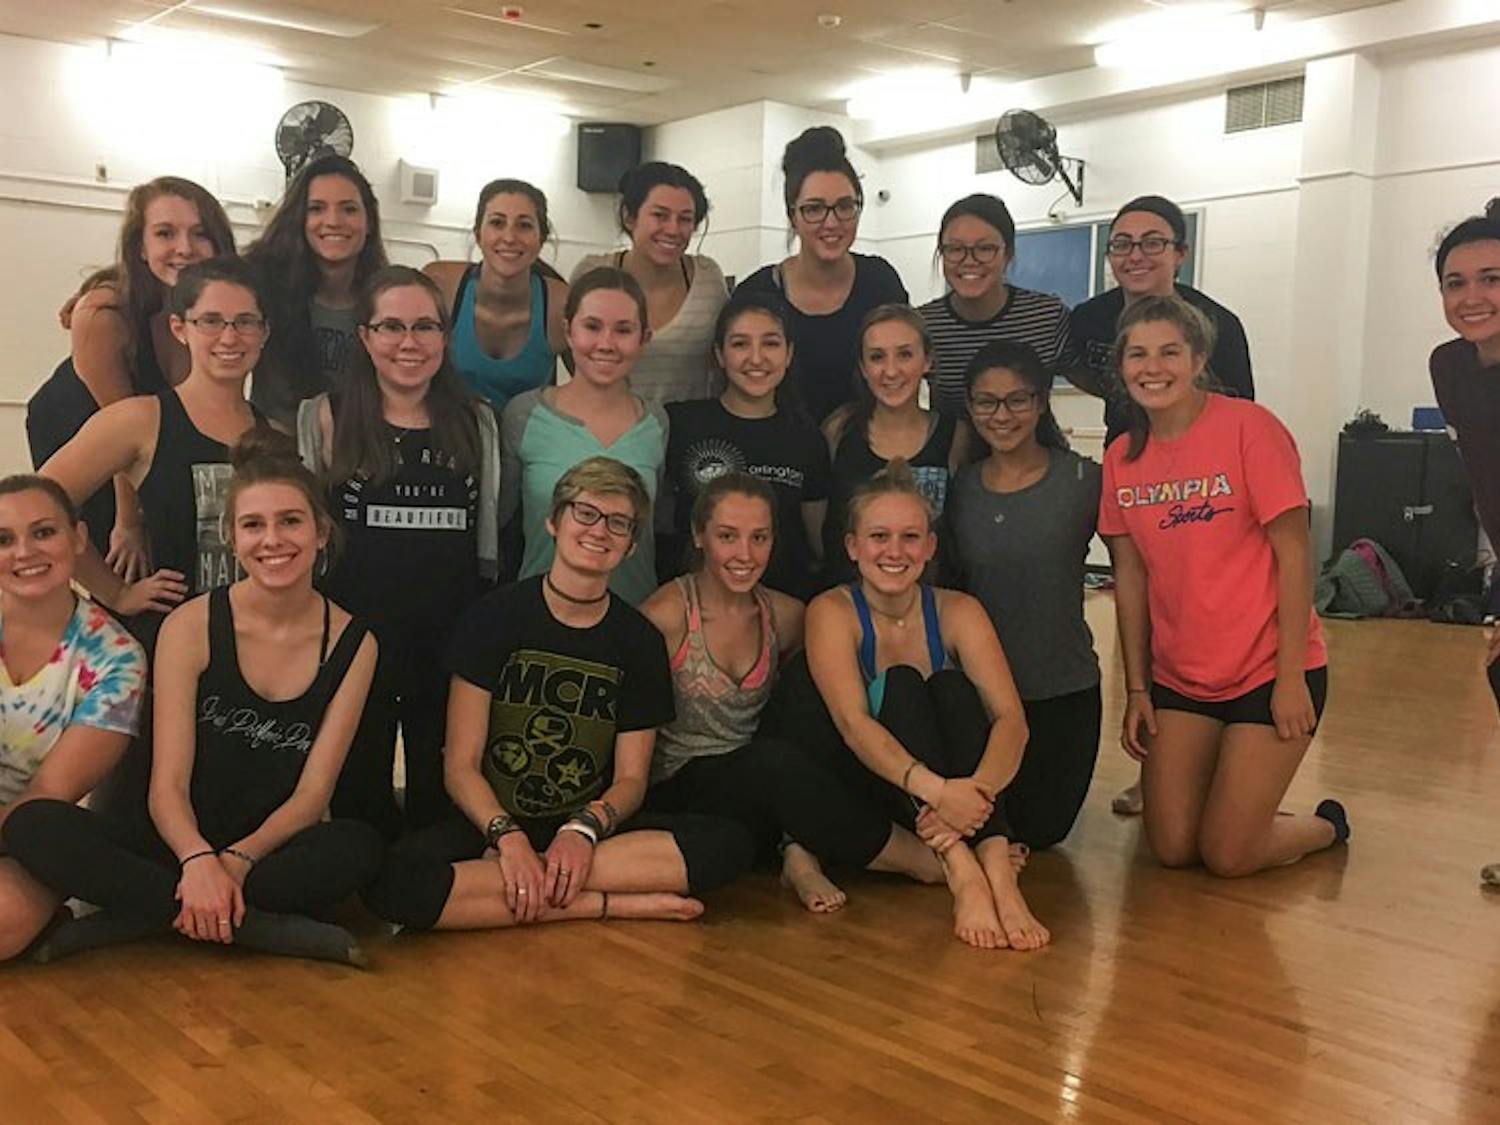 Members of Impulse Dance club during a weekly class. The club offers classes for experienced dancers as well as students who may not have danced in a while or never danced at all.